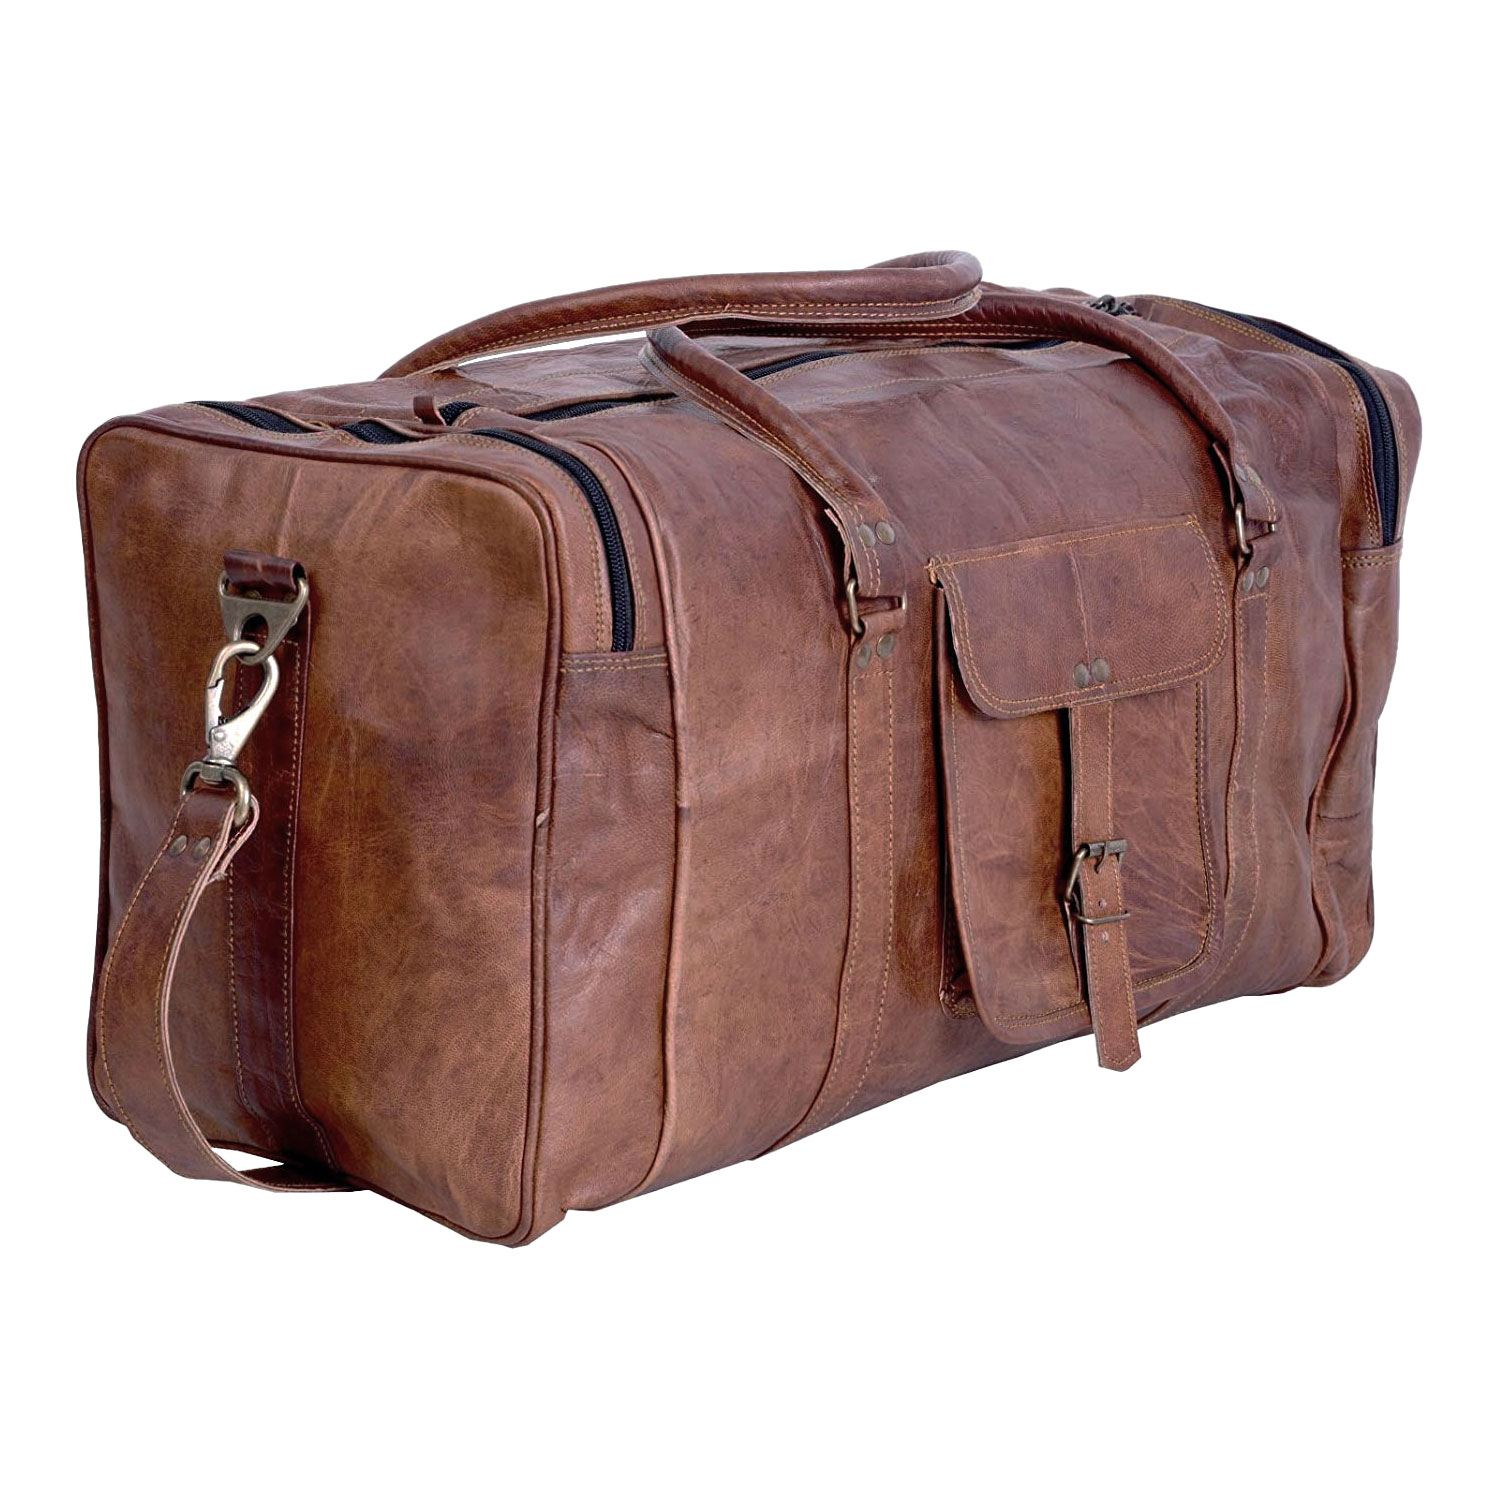 KPL 21 Inch Vintage Leather Duffel Travel Gym Sports Overnight Weekend Duffle Bags for men and women - image 1 of 9